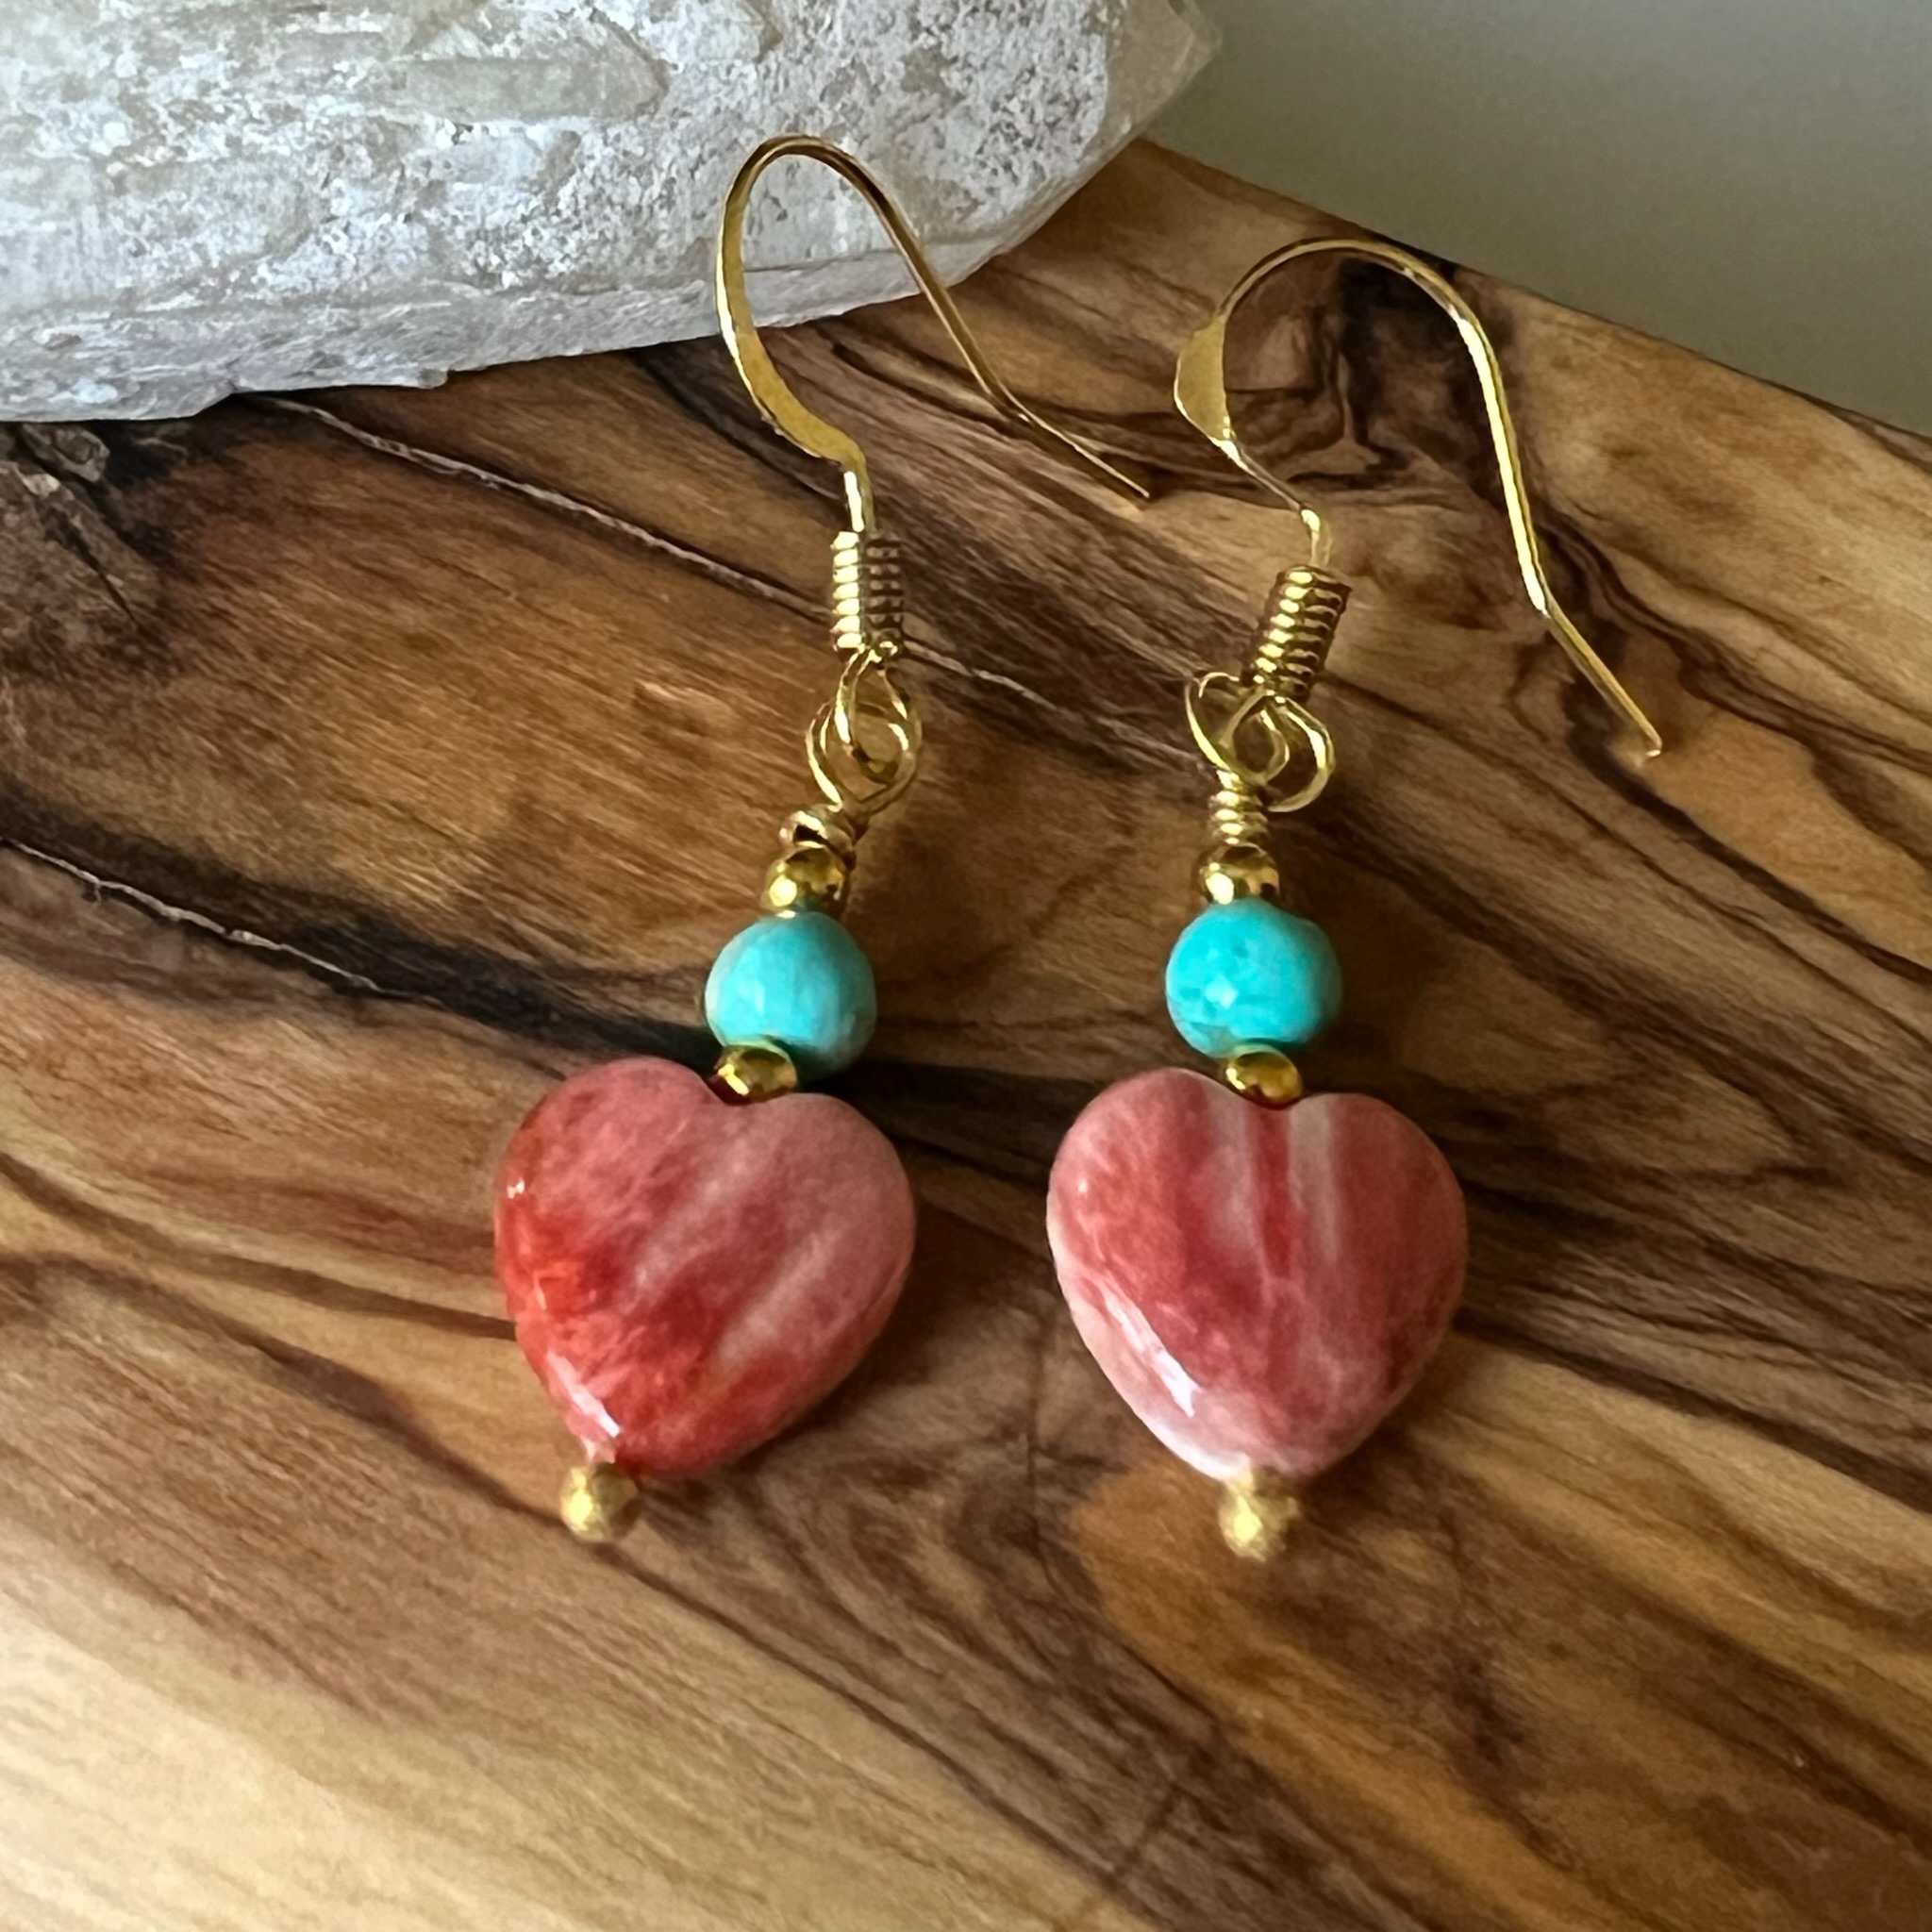 Spiny-Oyster-Heart-Earrings-with-Aqua-Dyed-Imperial-Jasper